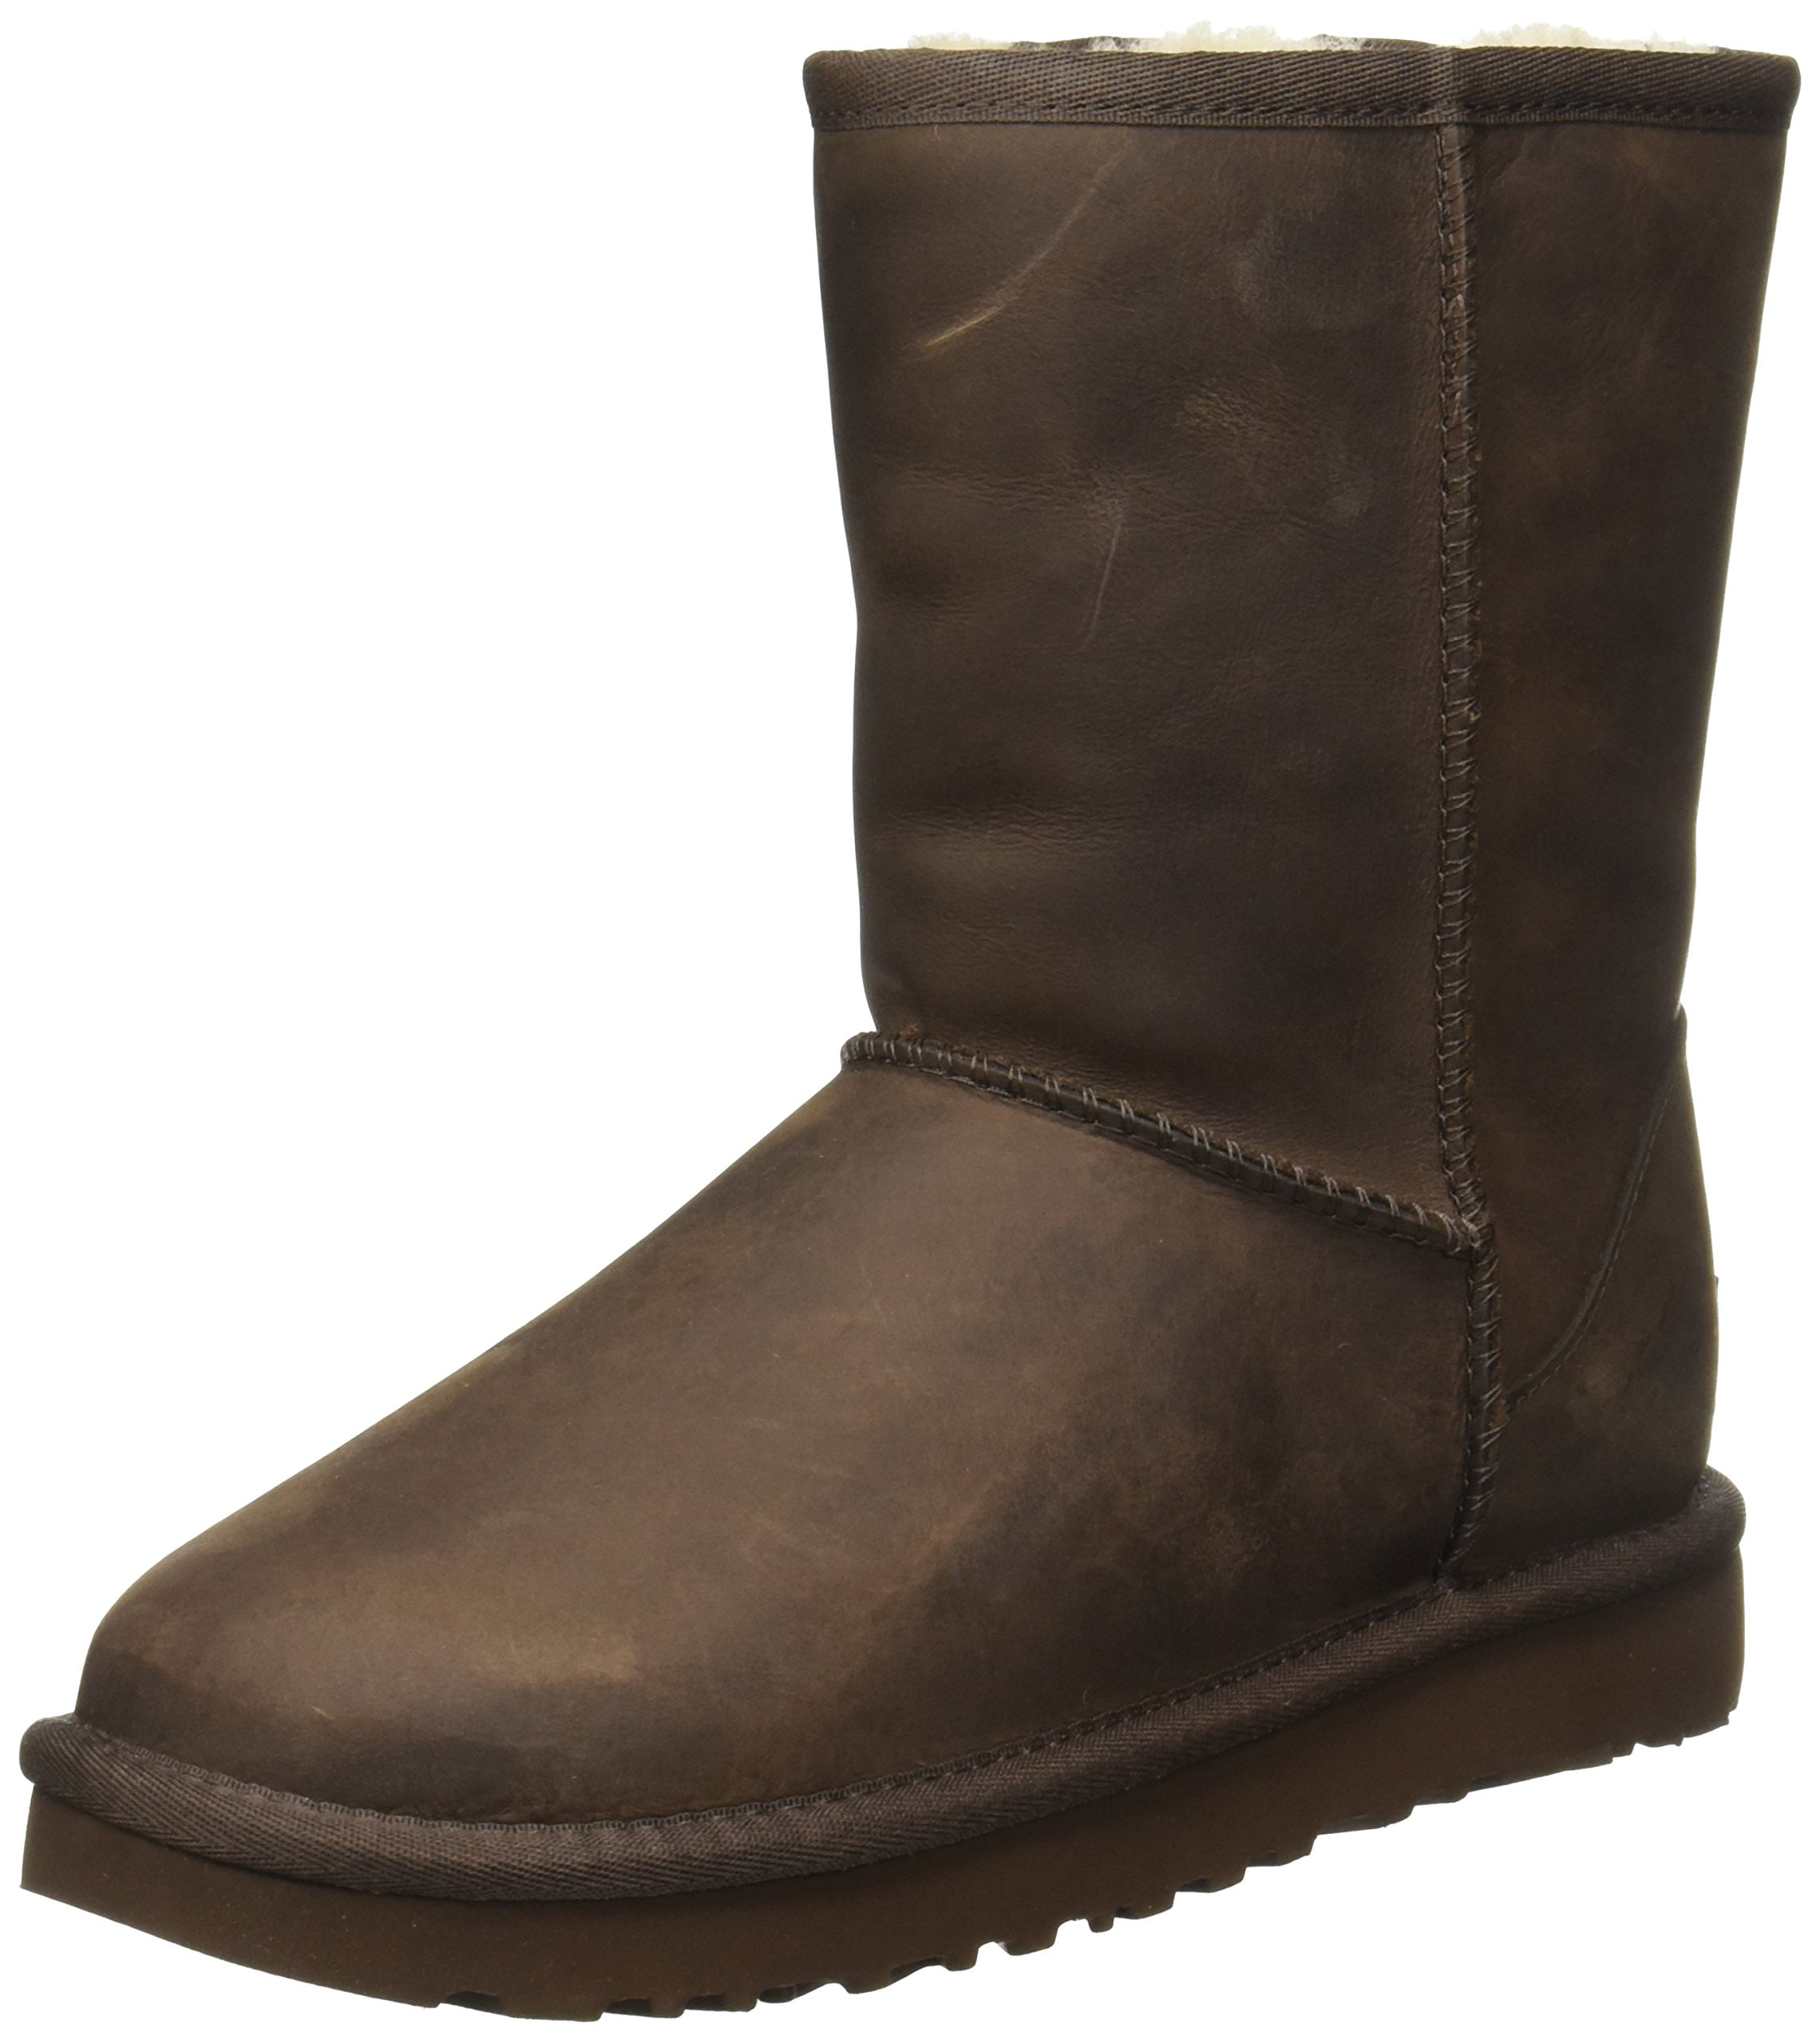 ugg leather boots